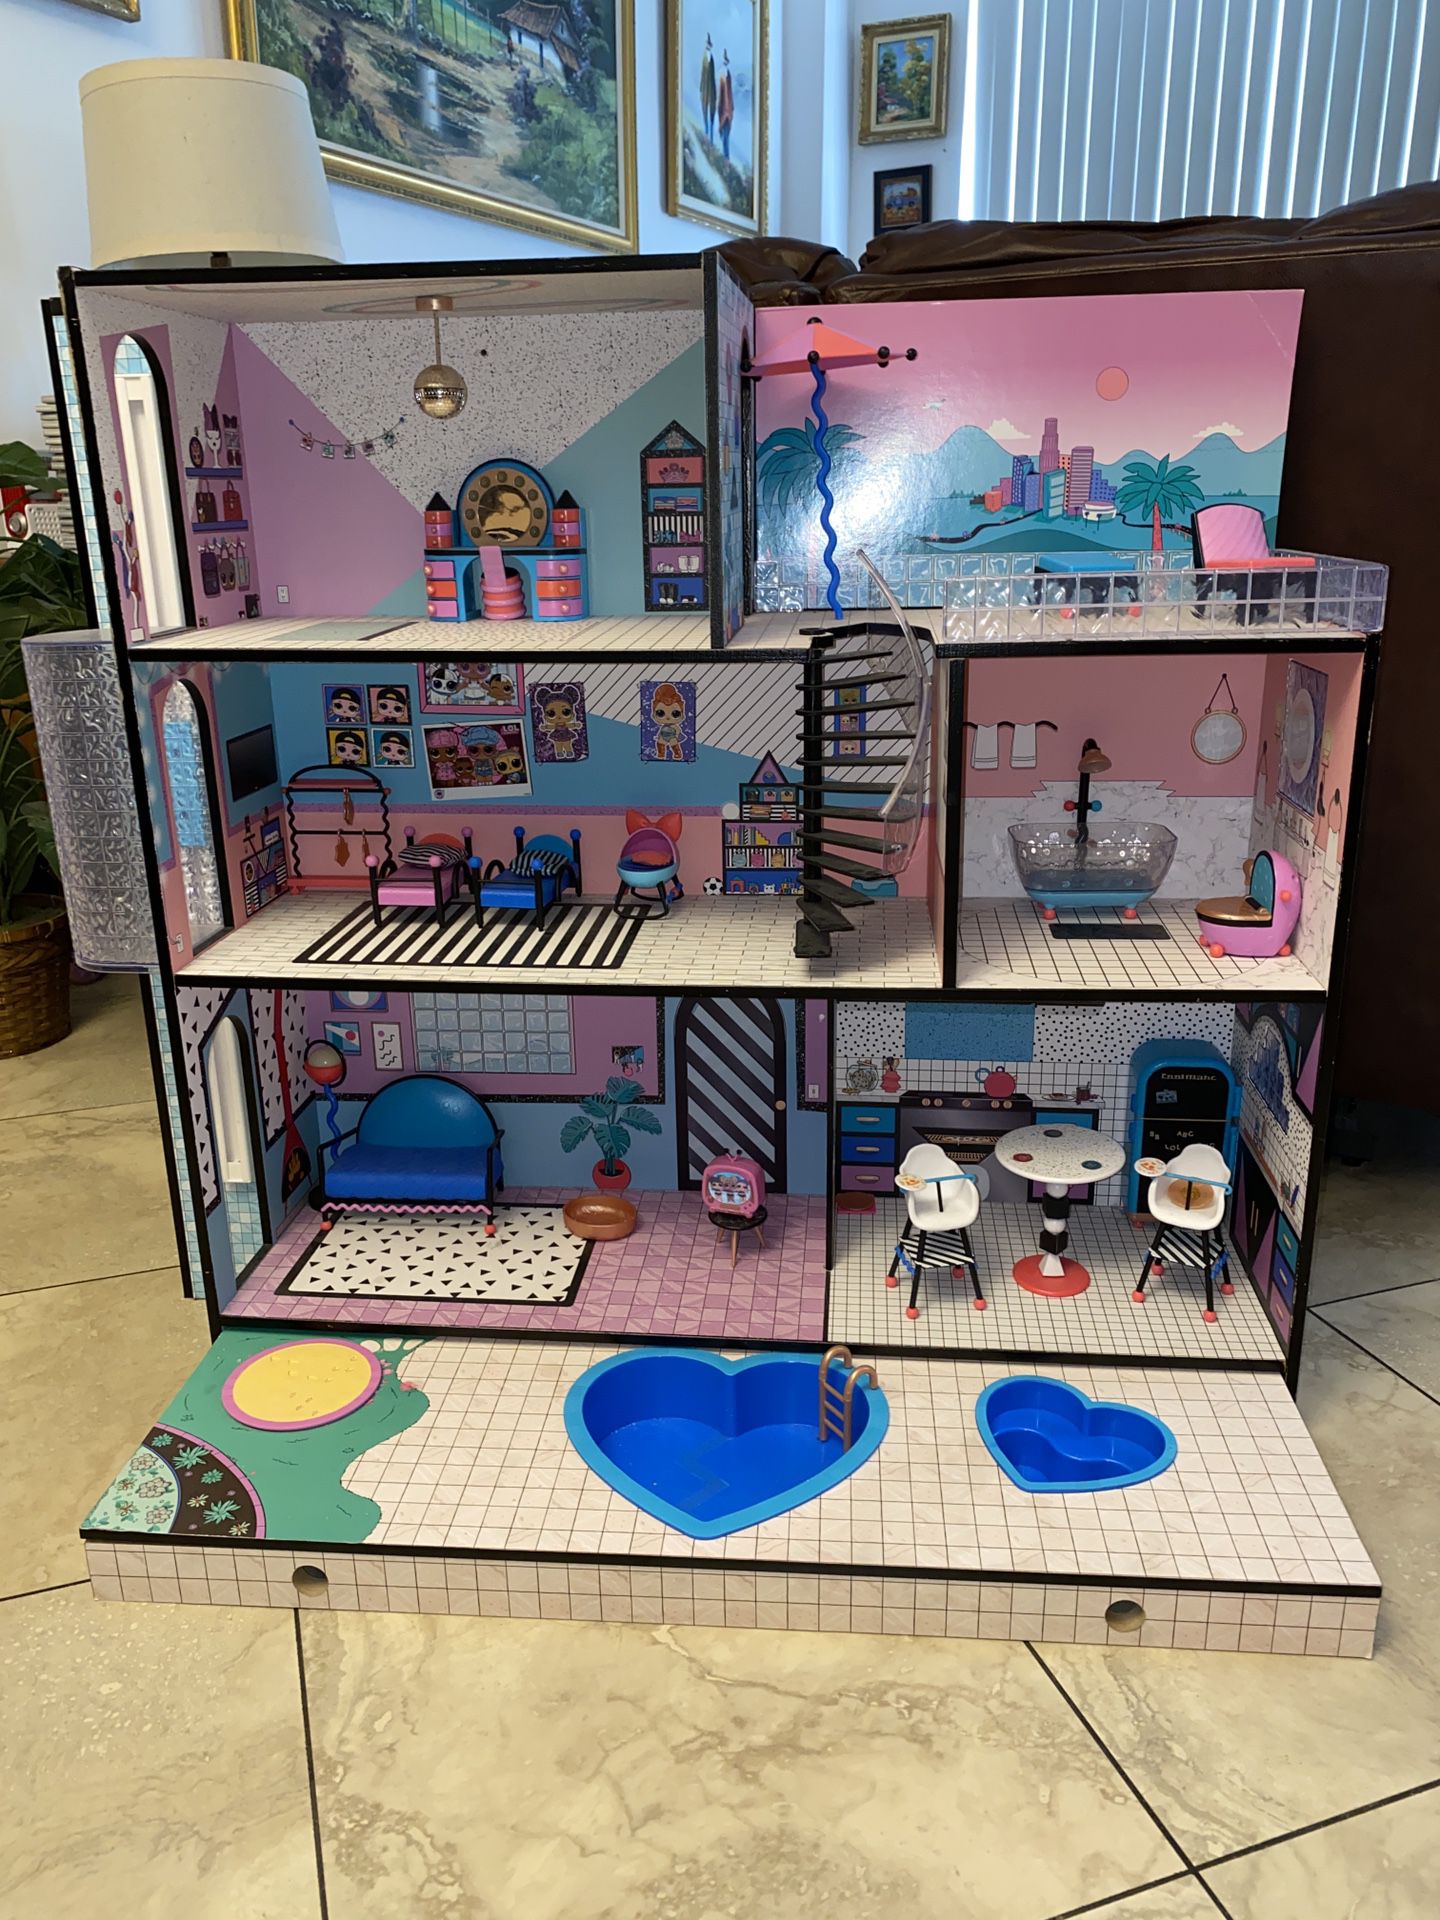 LOL Doll House with many dolls and accessories